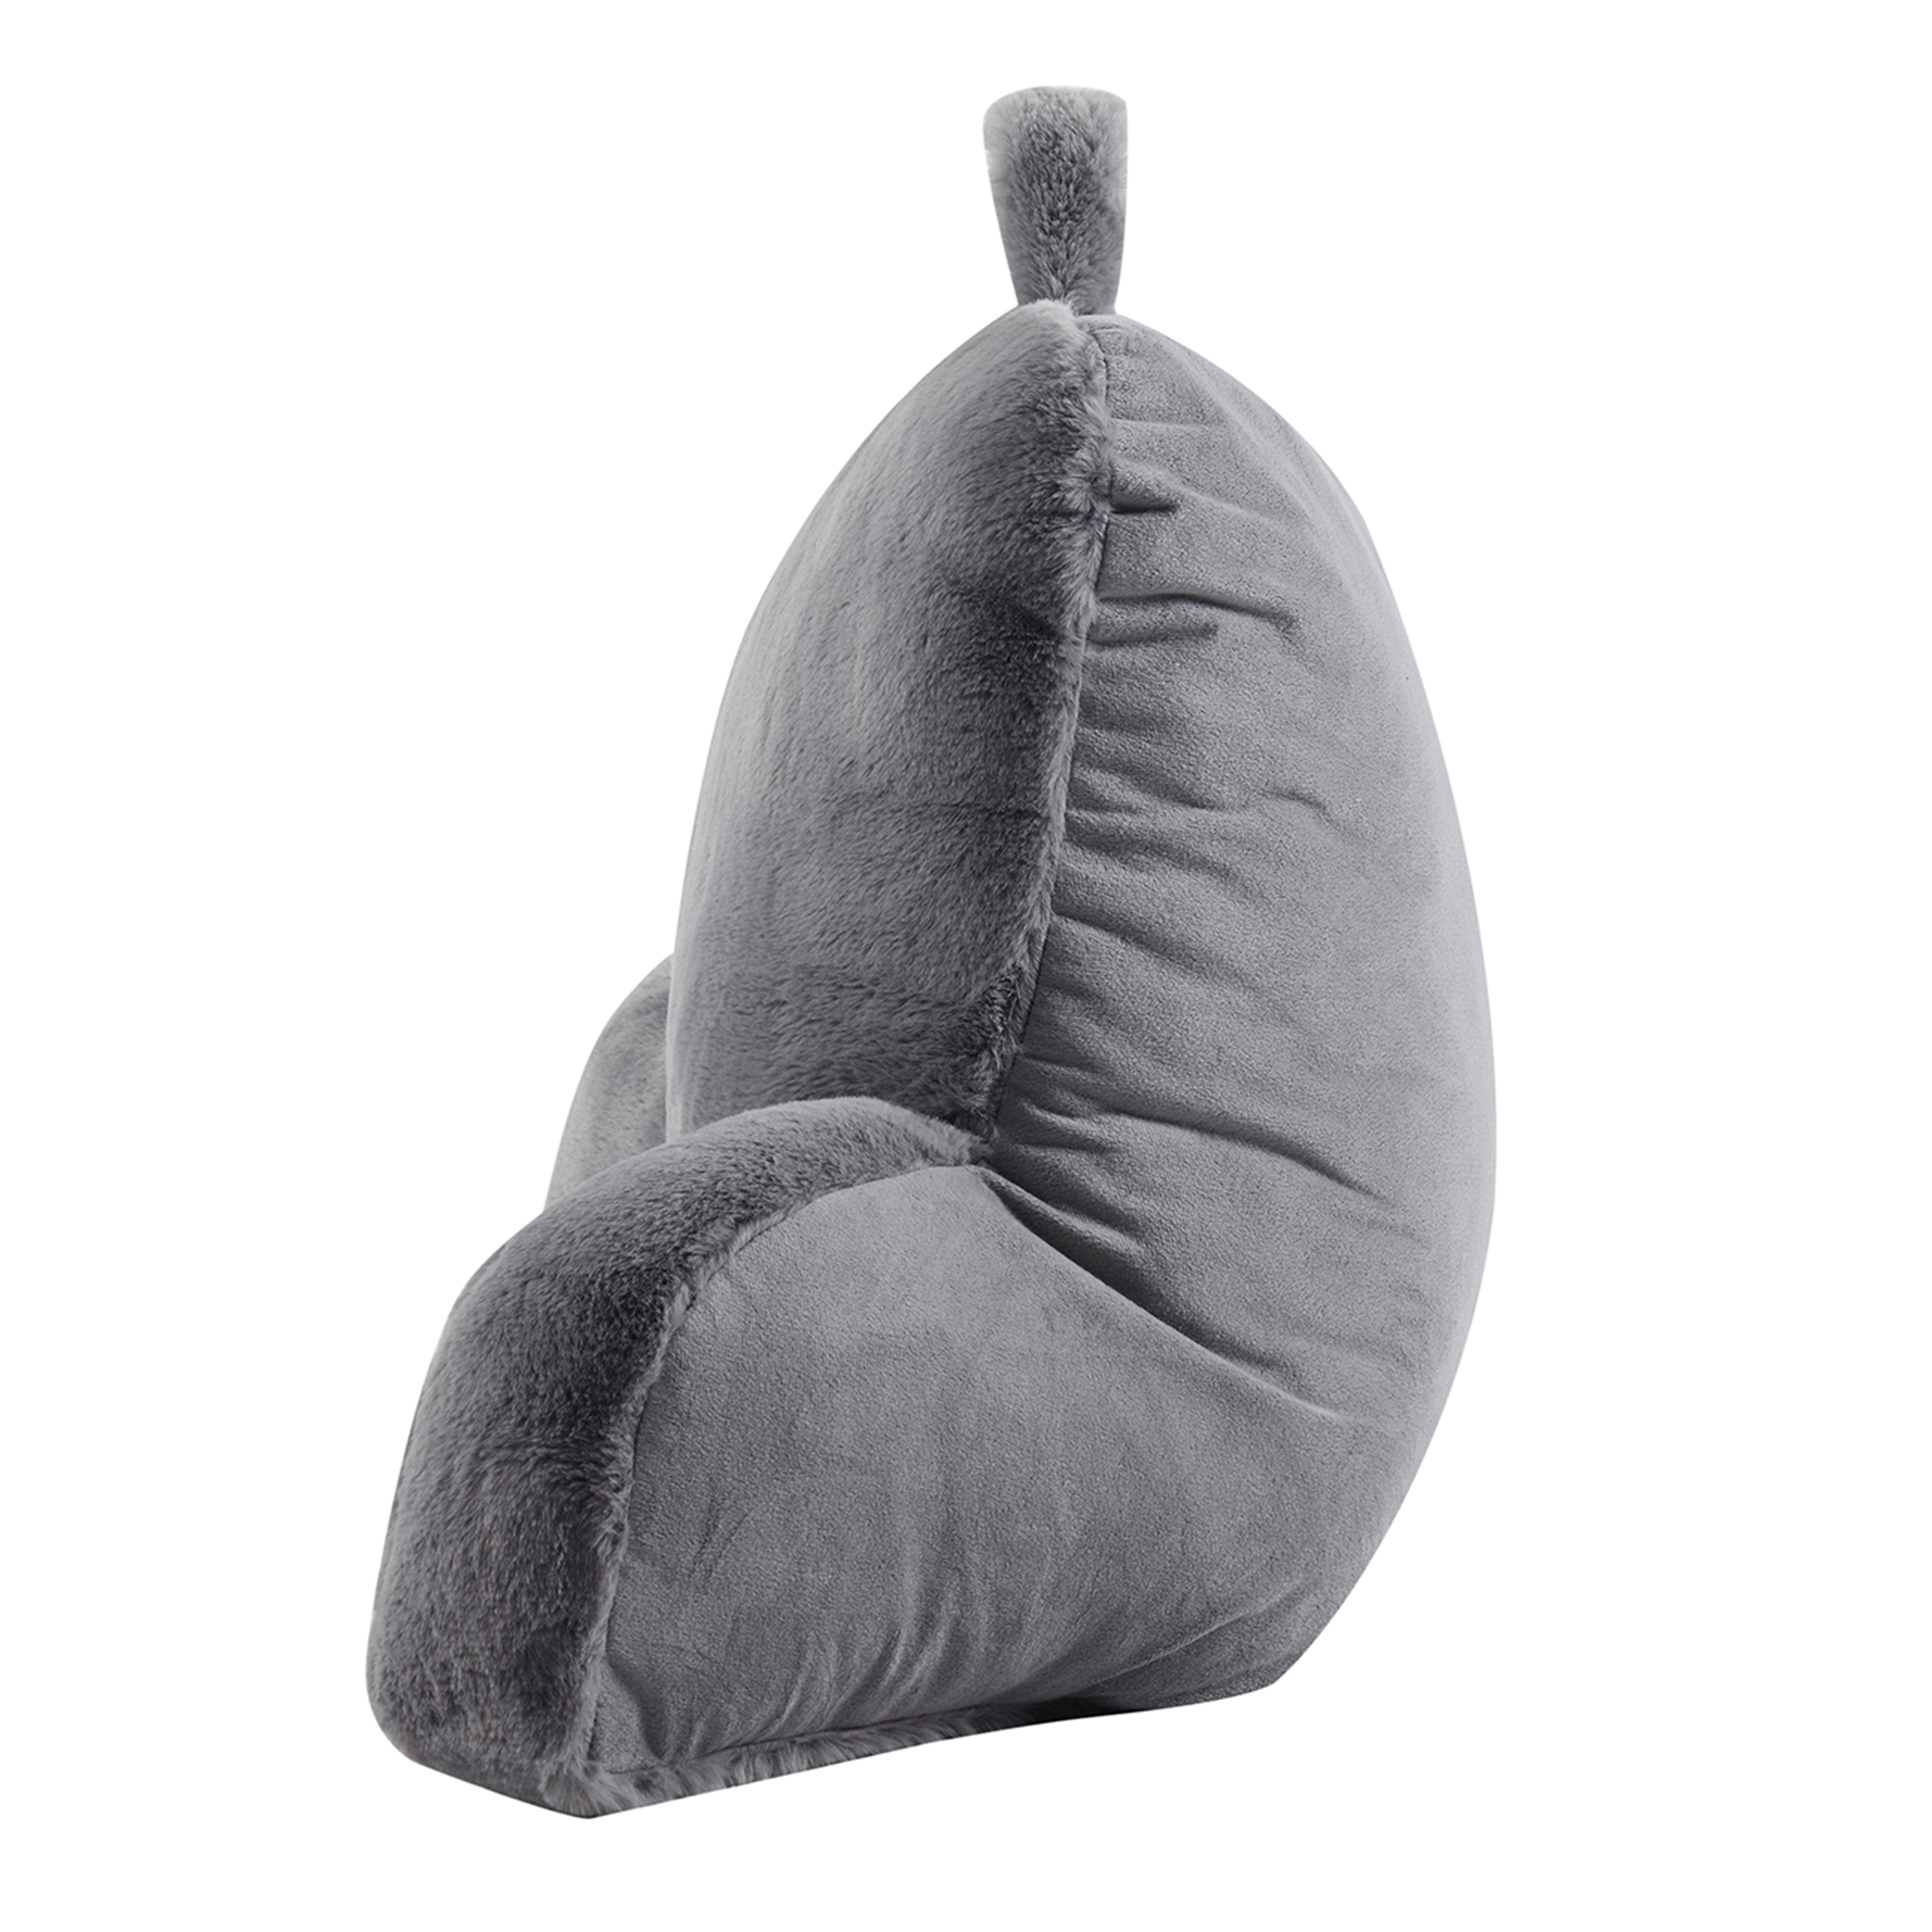 Mainstays Faux Fur Plush Bedrest Pillow, Specialty Size, Gray - image 3 of 6